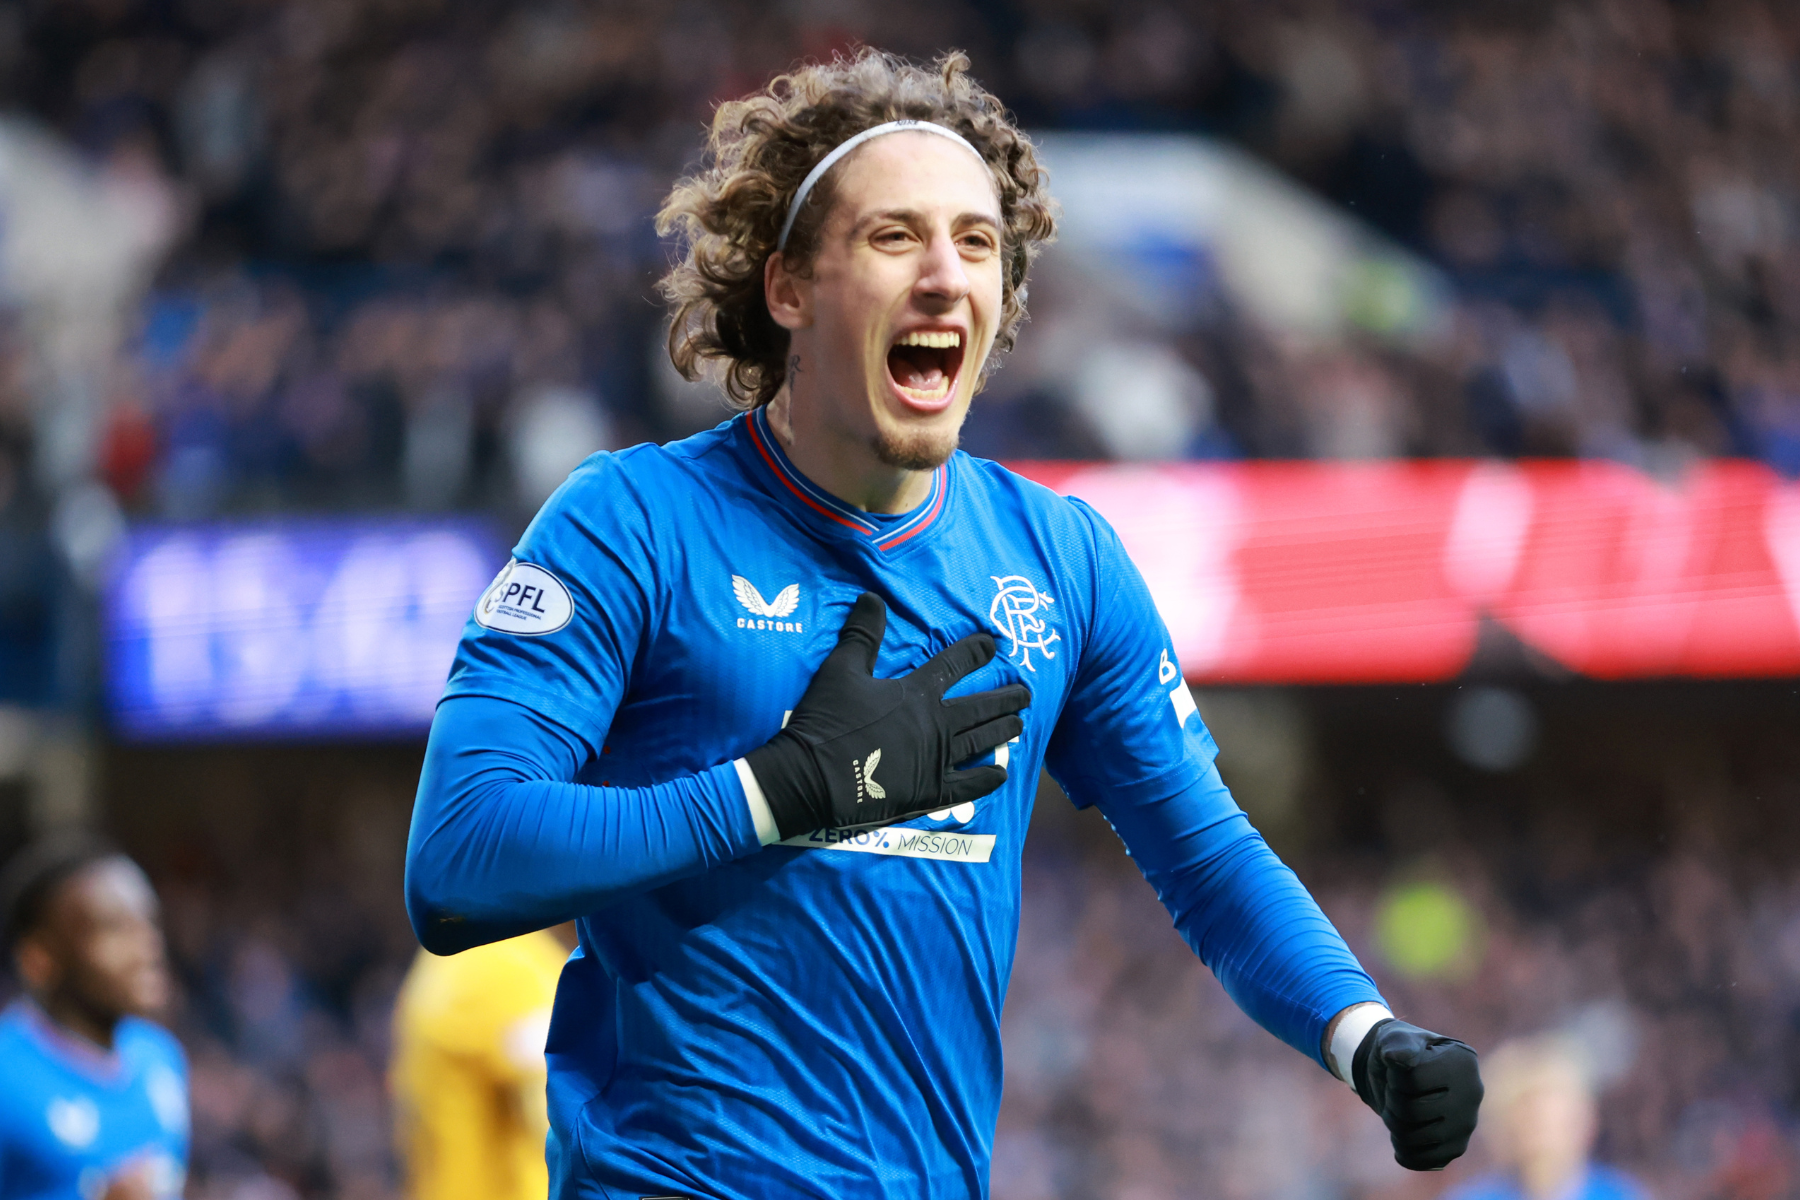 Rangers 3 Livingston 0: Instant reaction to the burning issues